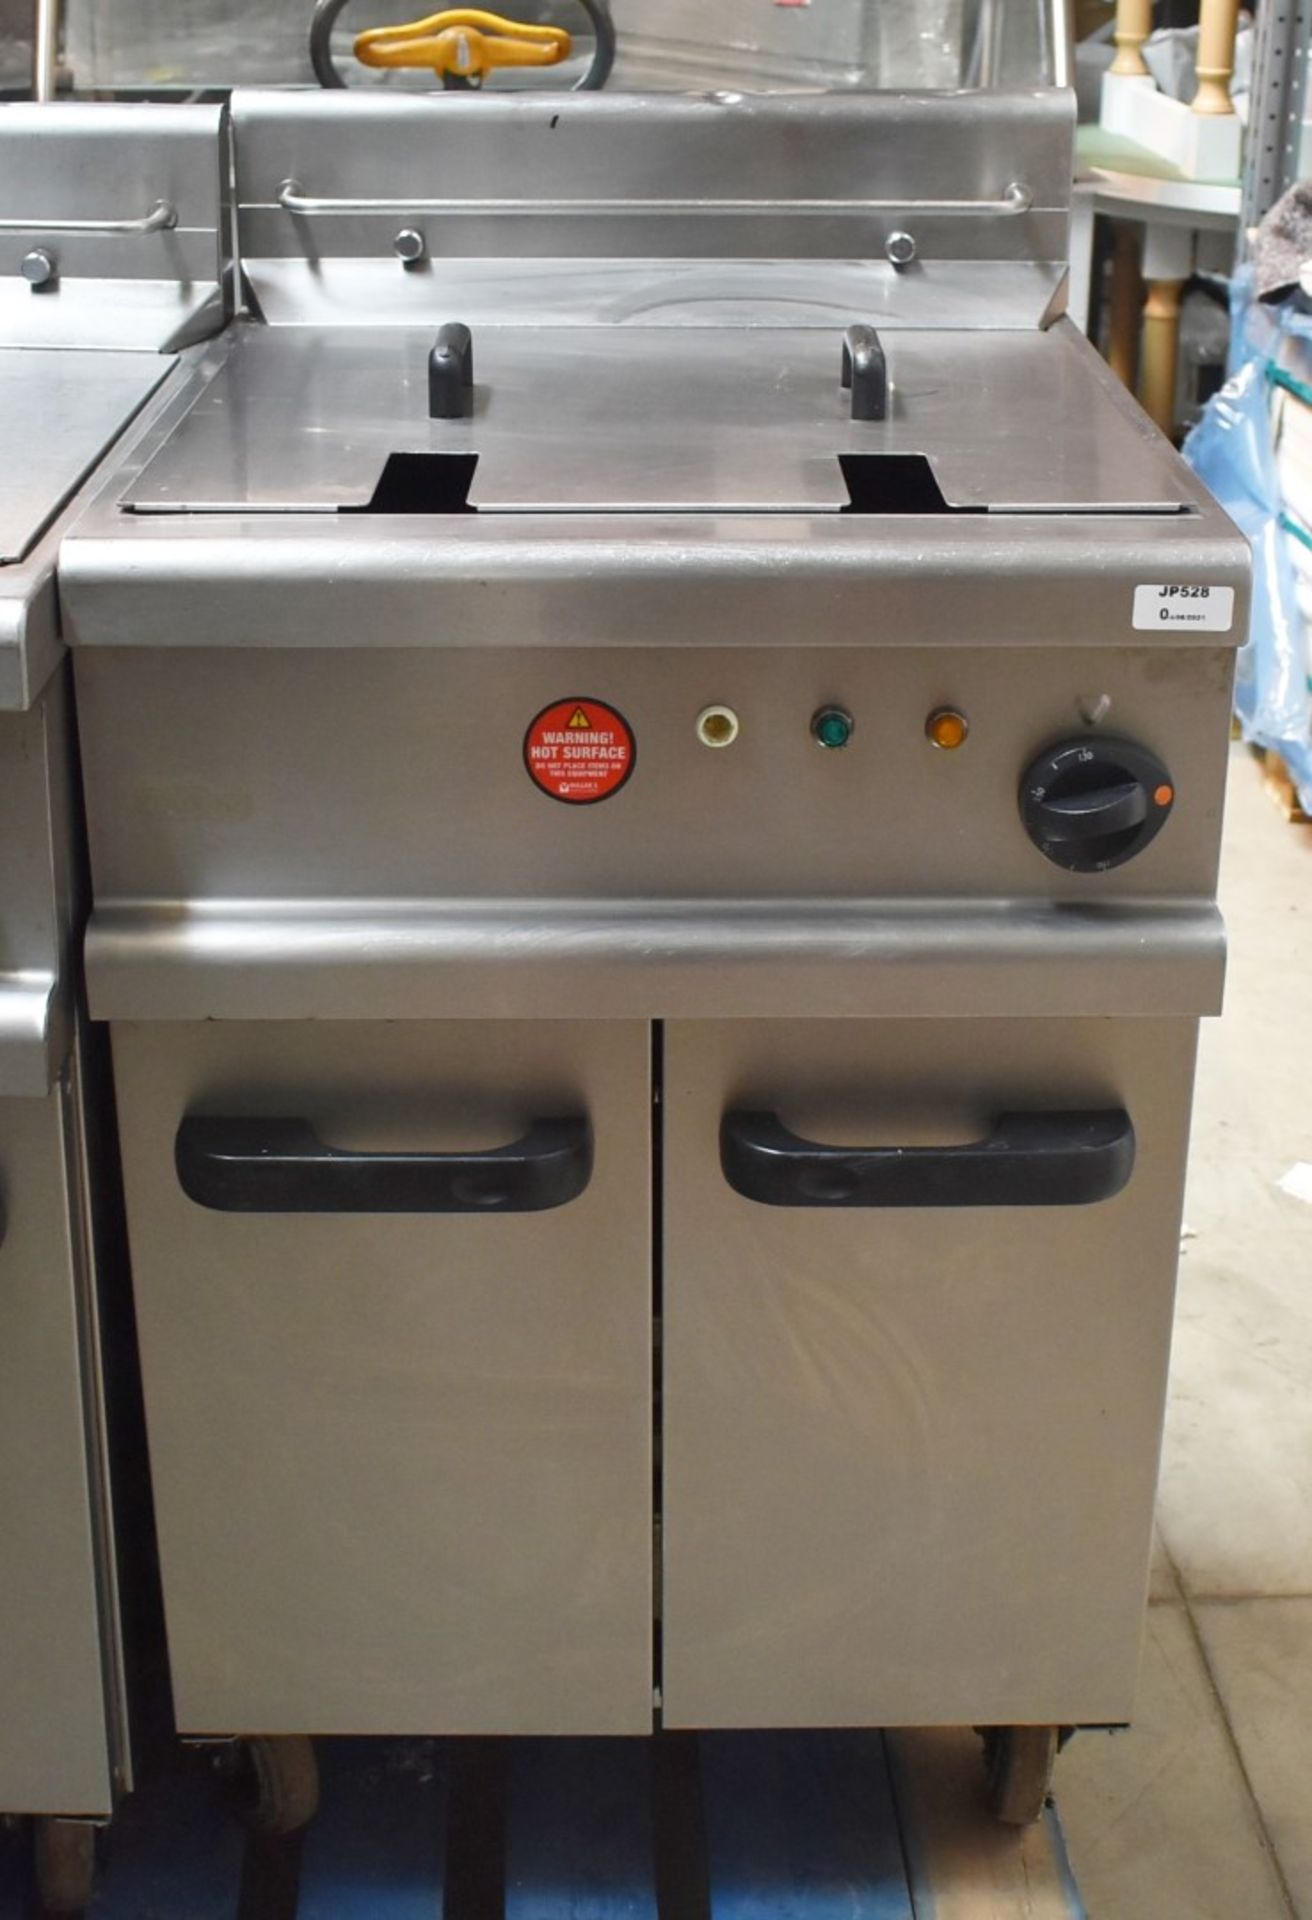 1 x Lincat Opus 700 OE7113 Single Large Tank Electric Fryer With Built In Filteration - 240V / 3PH P - Image 12 of 12